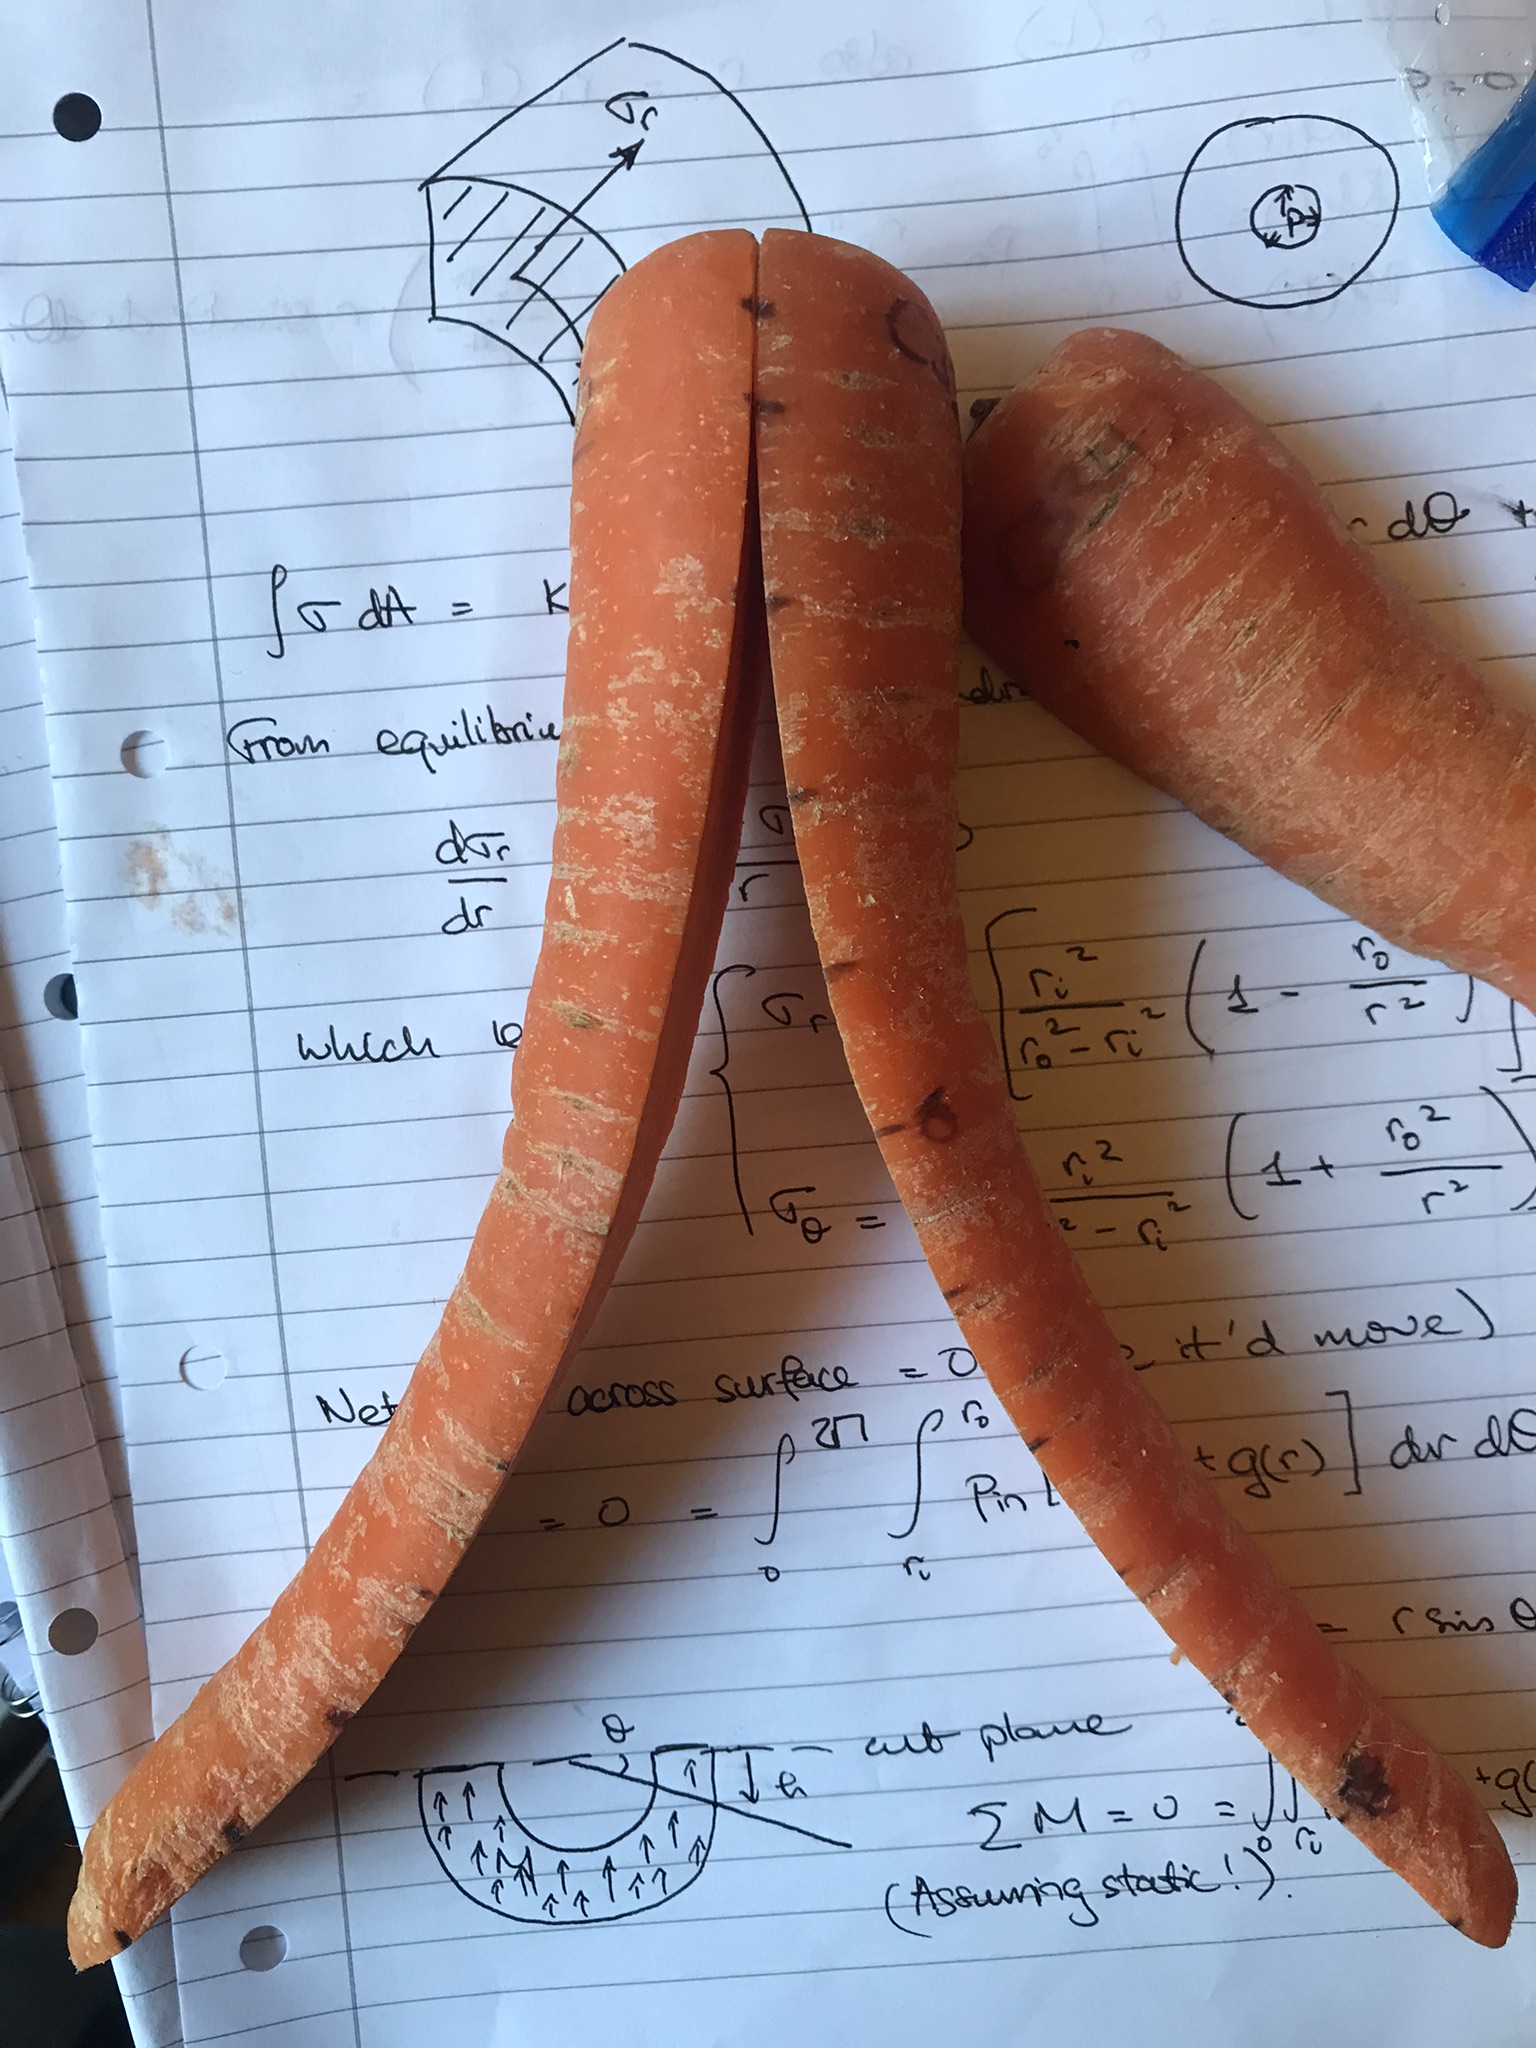 A Lancashire Nantes carrot curling outwards after being cut in half